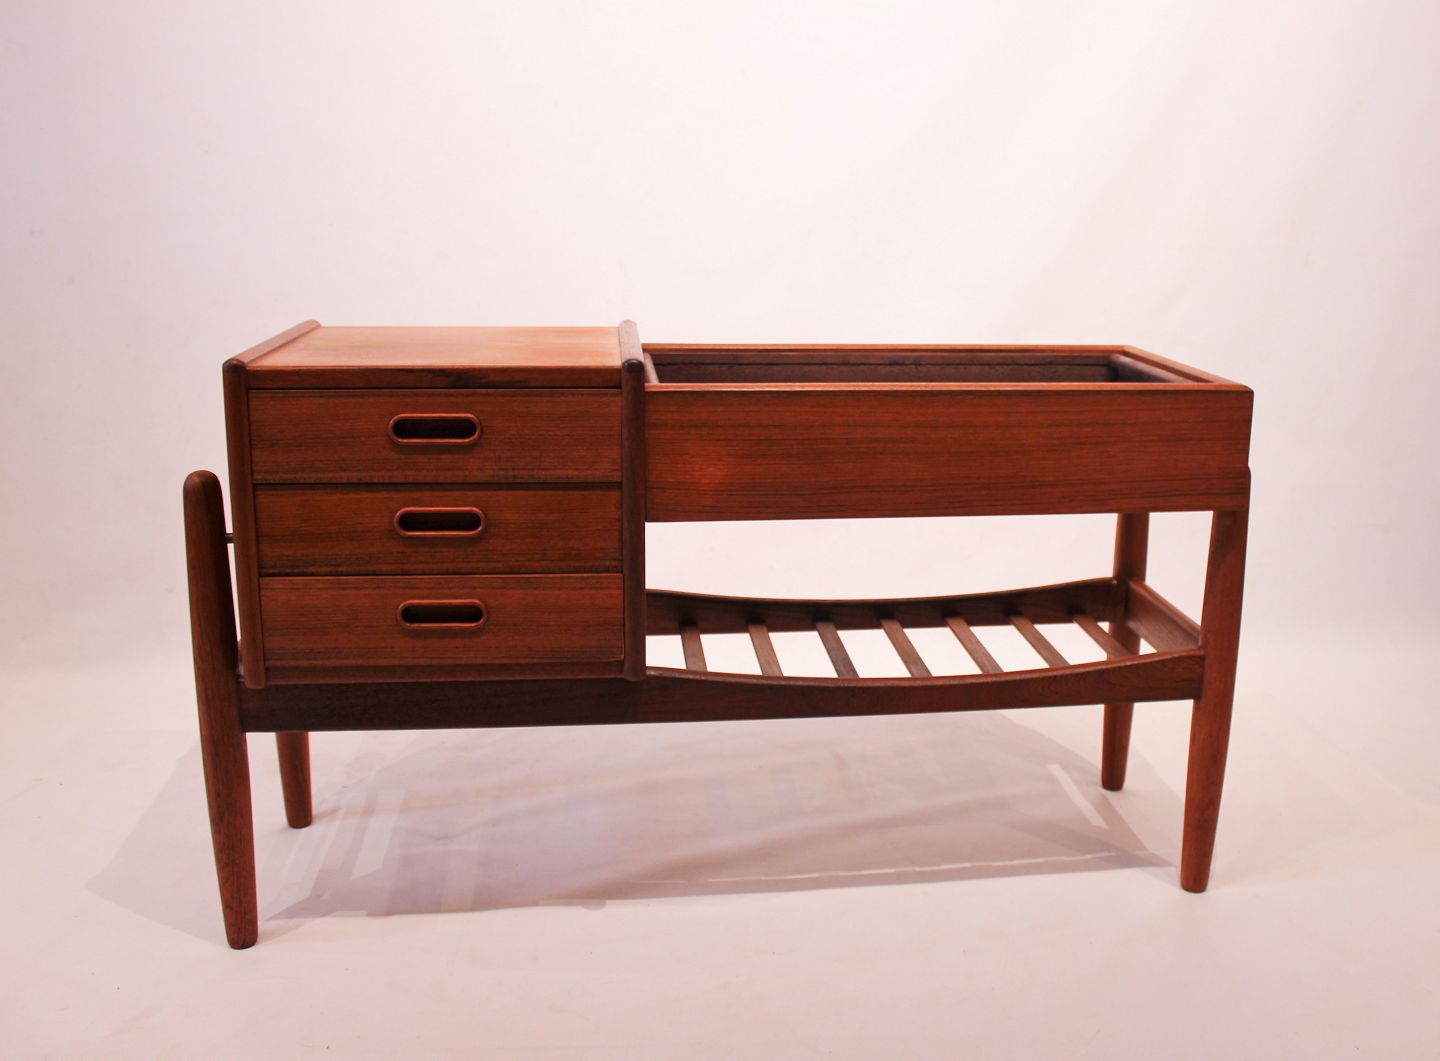 KAD - Small sideboard of designed by Vodder from the 1960s. * 5000m2 showroo - Small sideboard of teak designed by Arne Vodder from the 1960s. * 5000m2 showroo